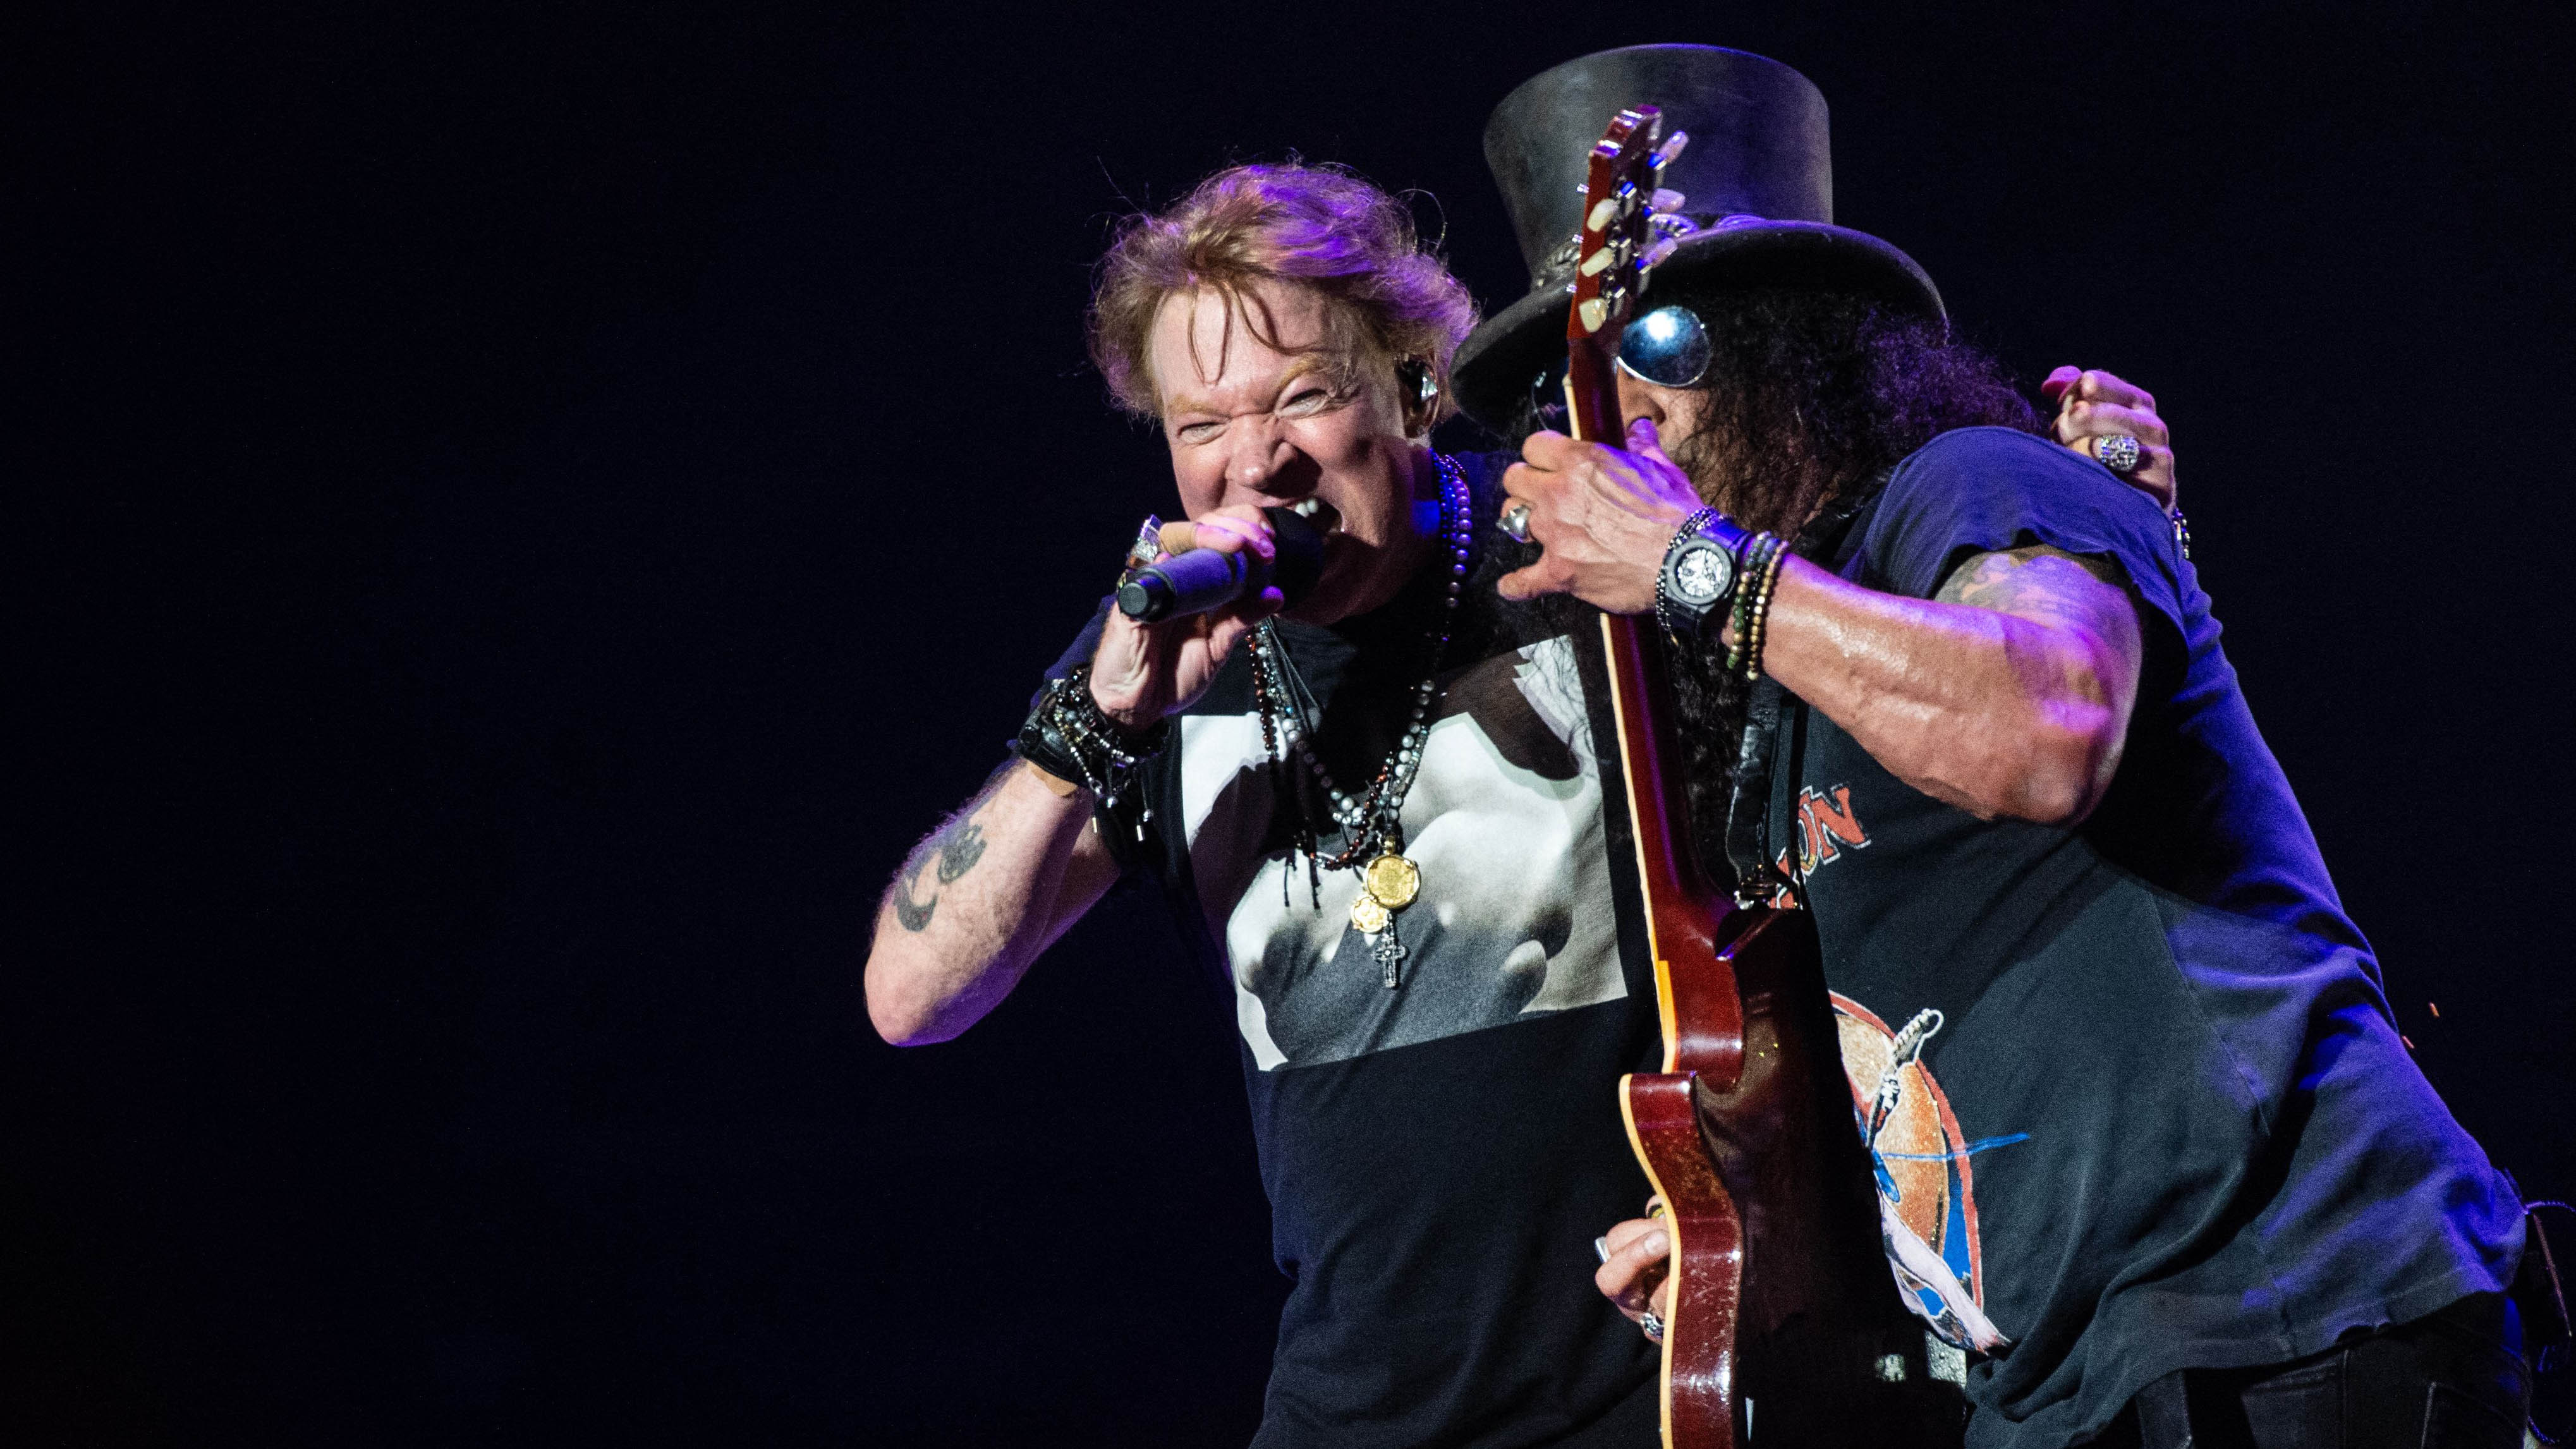 "Guns N' Roses are trying to make their own record and I'm working with them", Slash reveals